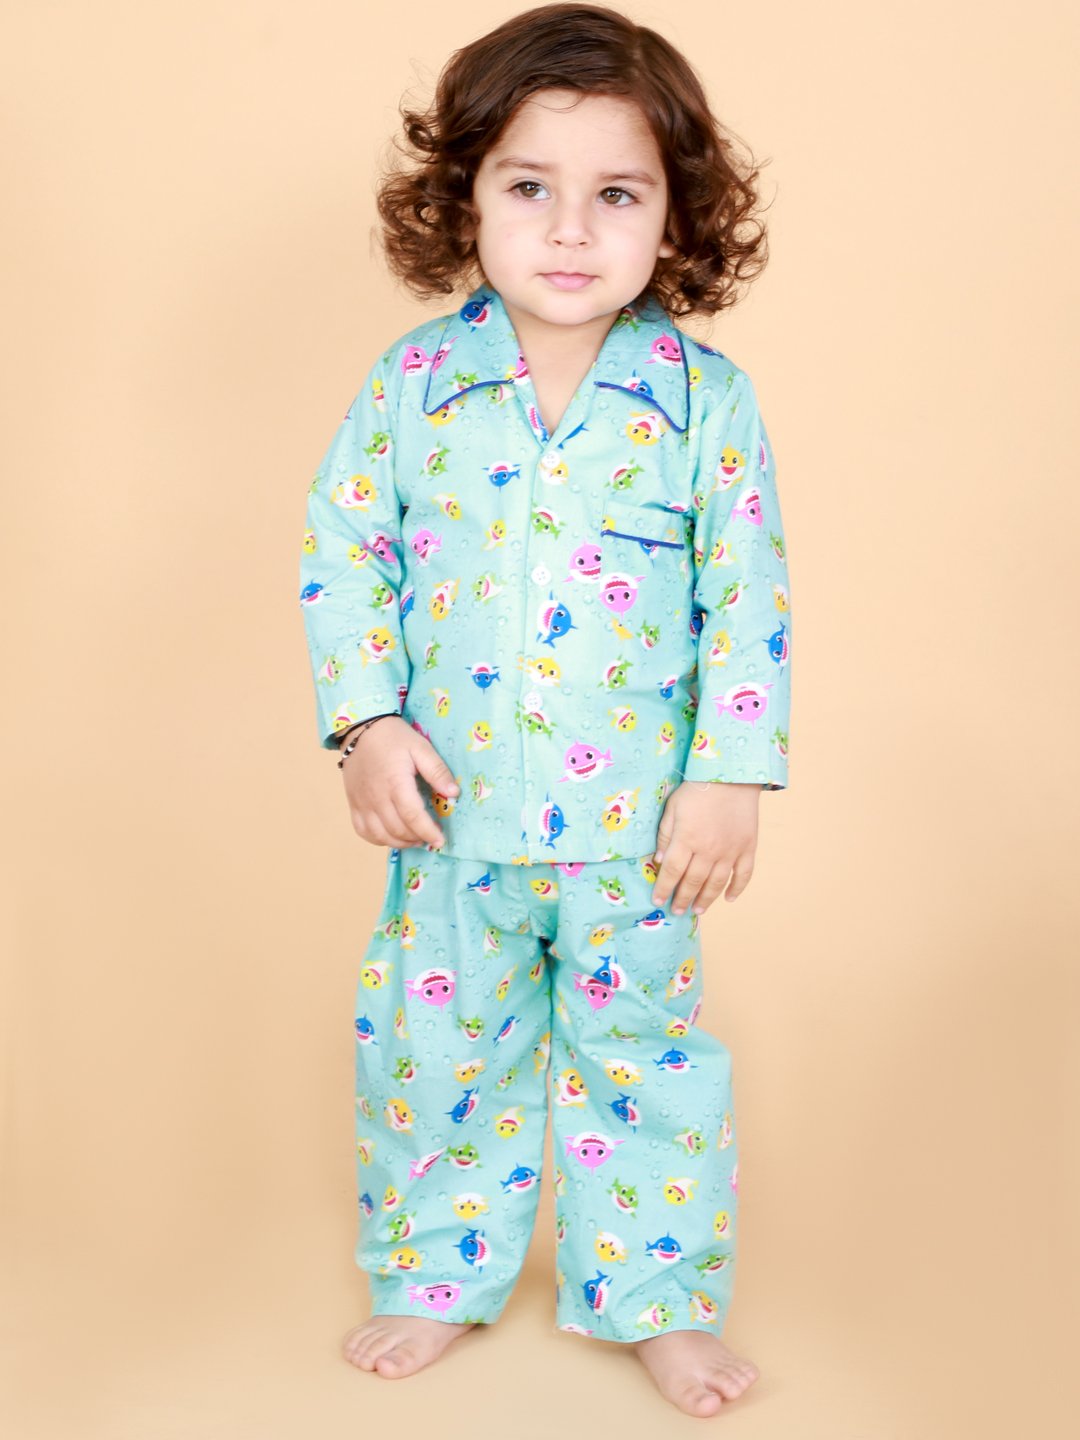 Apna Showroom Baby Boy's and Girl's Night Suit for 6-12 Months Combo Set  (Pair of 2_Baby_Products_) : Amazon.in: Clothing & Accessories